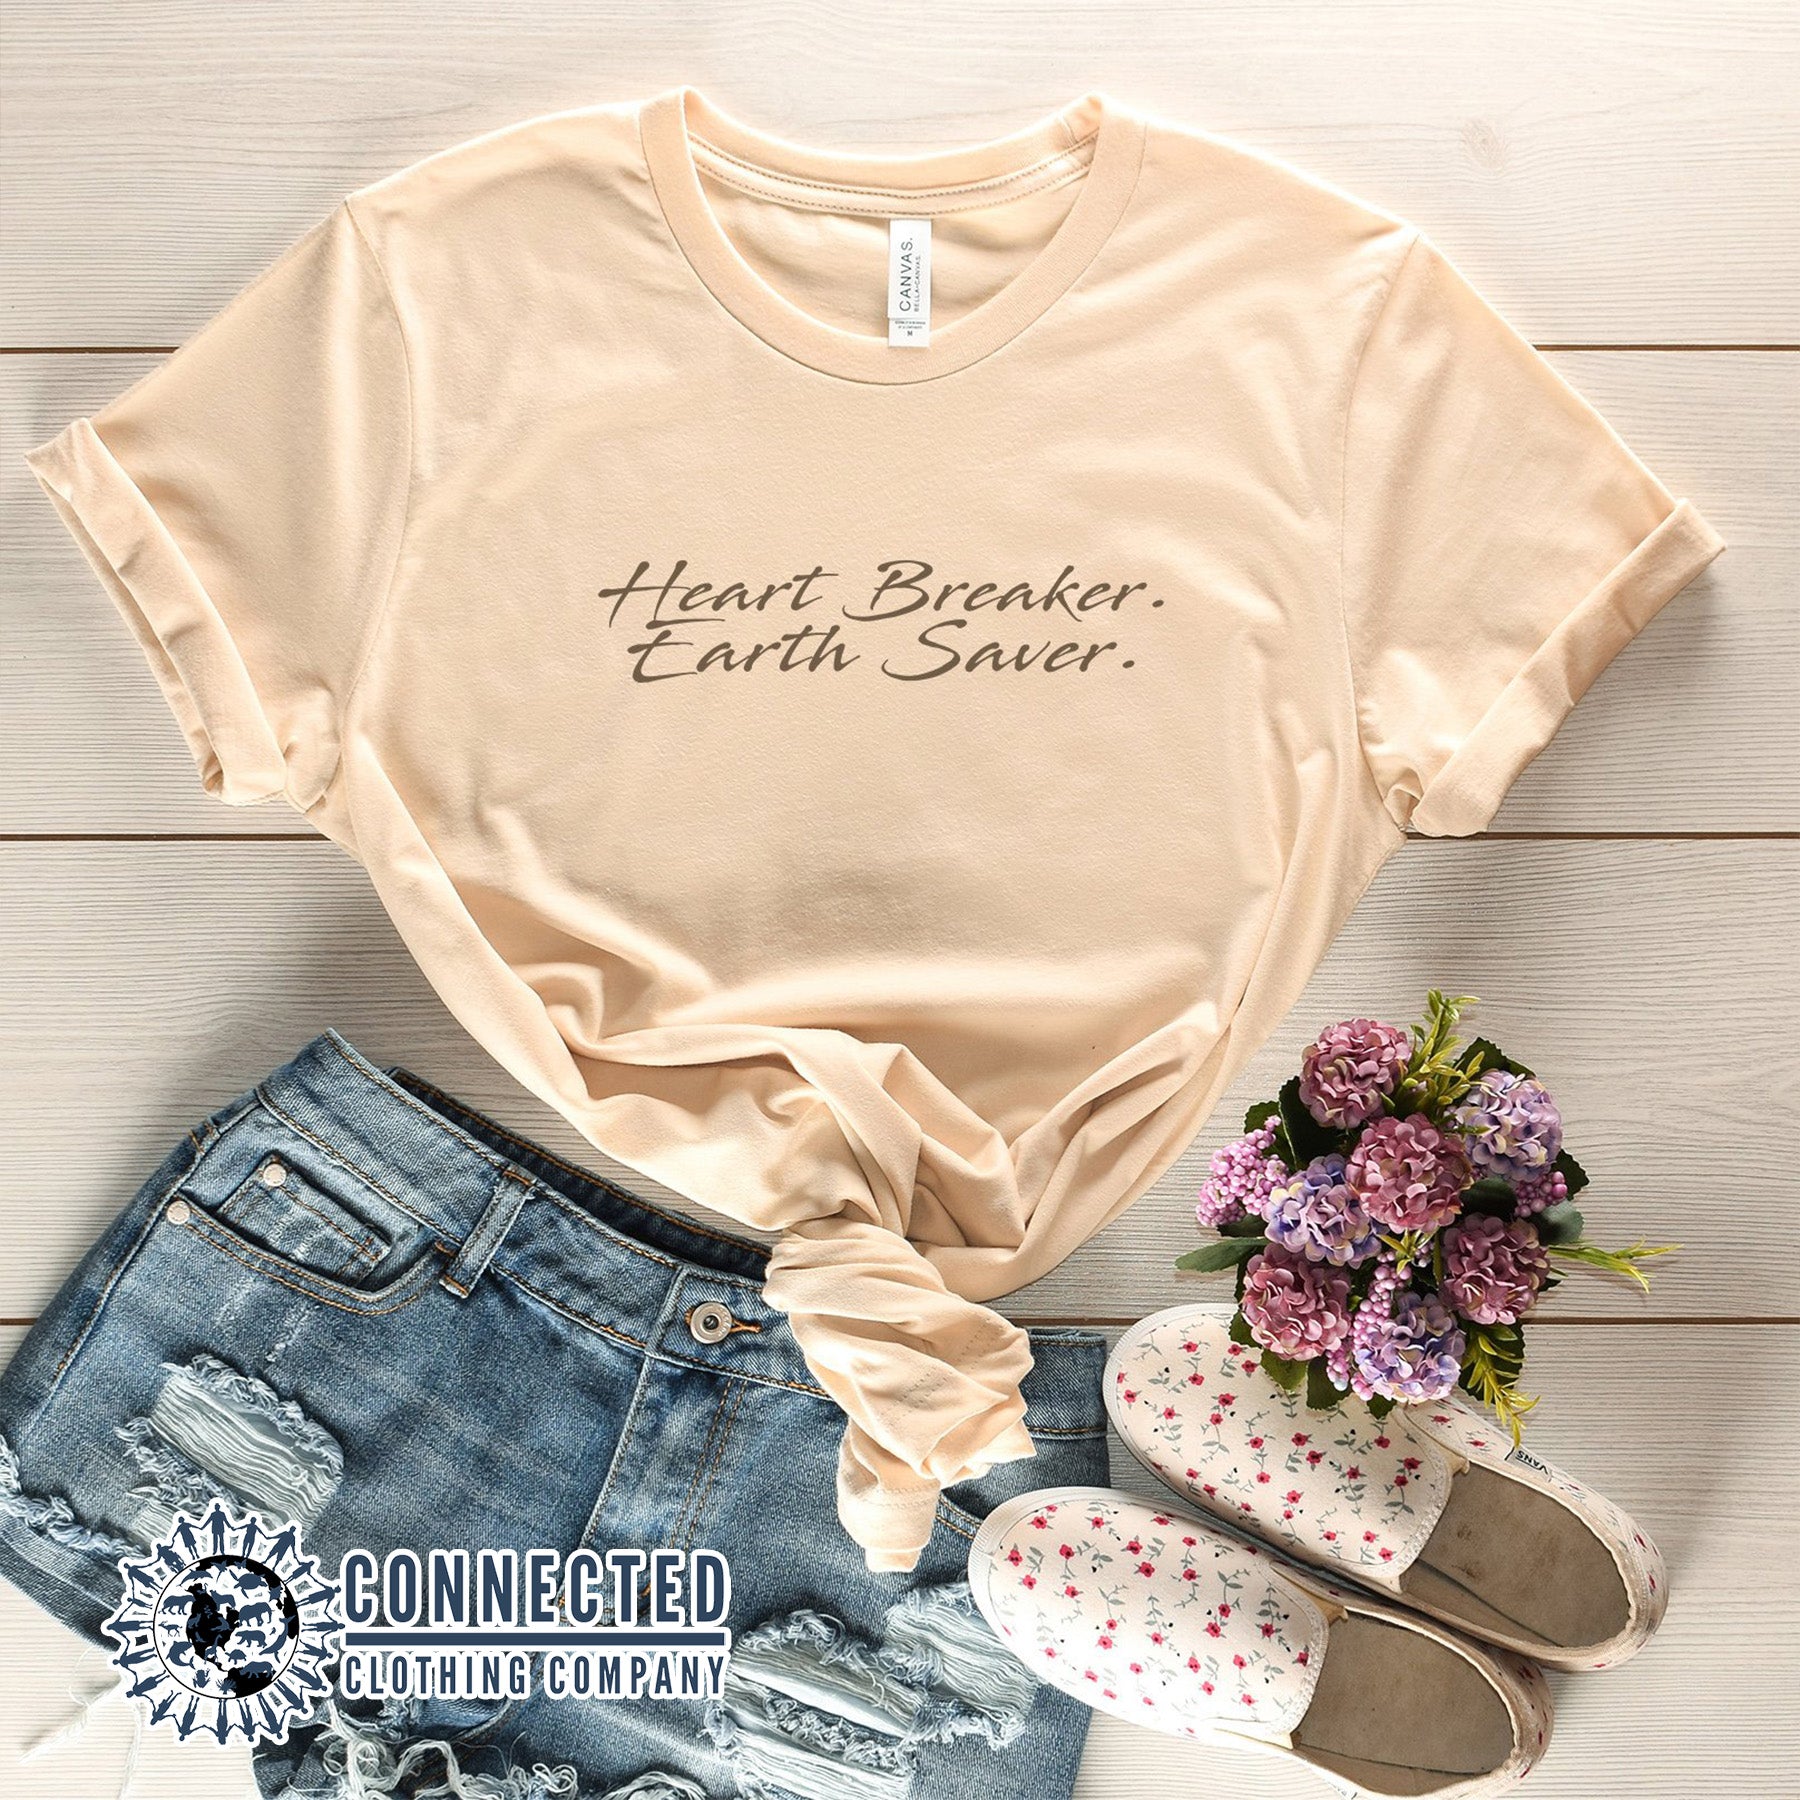 Soft Cream Heart Breaker. Earth Saver. Short-Sleeve Tee - sweetsherriloudesigns - Ethically and Sustainably Made - 10% of profits donated to ocean conservation